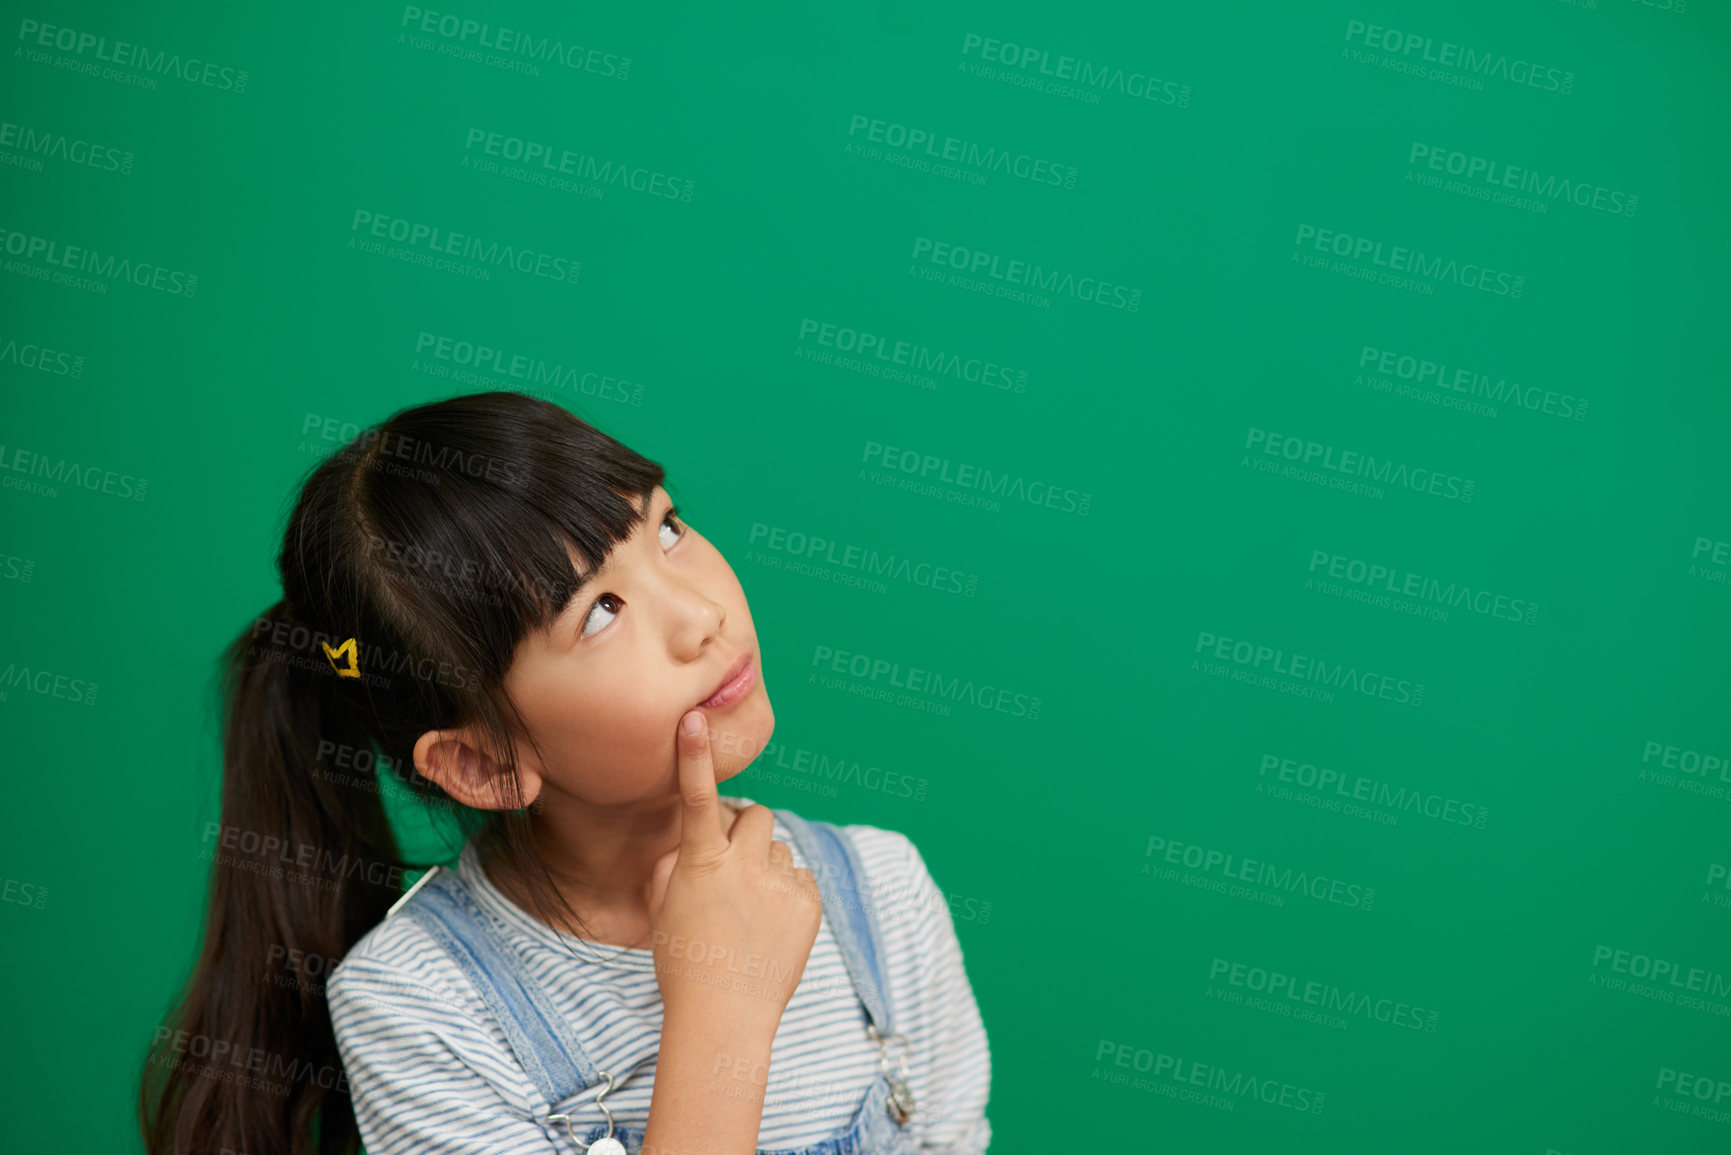 Buy stock photo Studio shot of an adorable little girl standing and contemplating against a green background